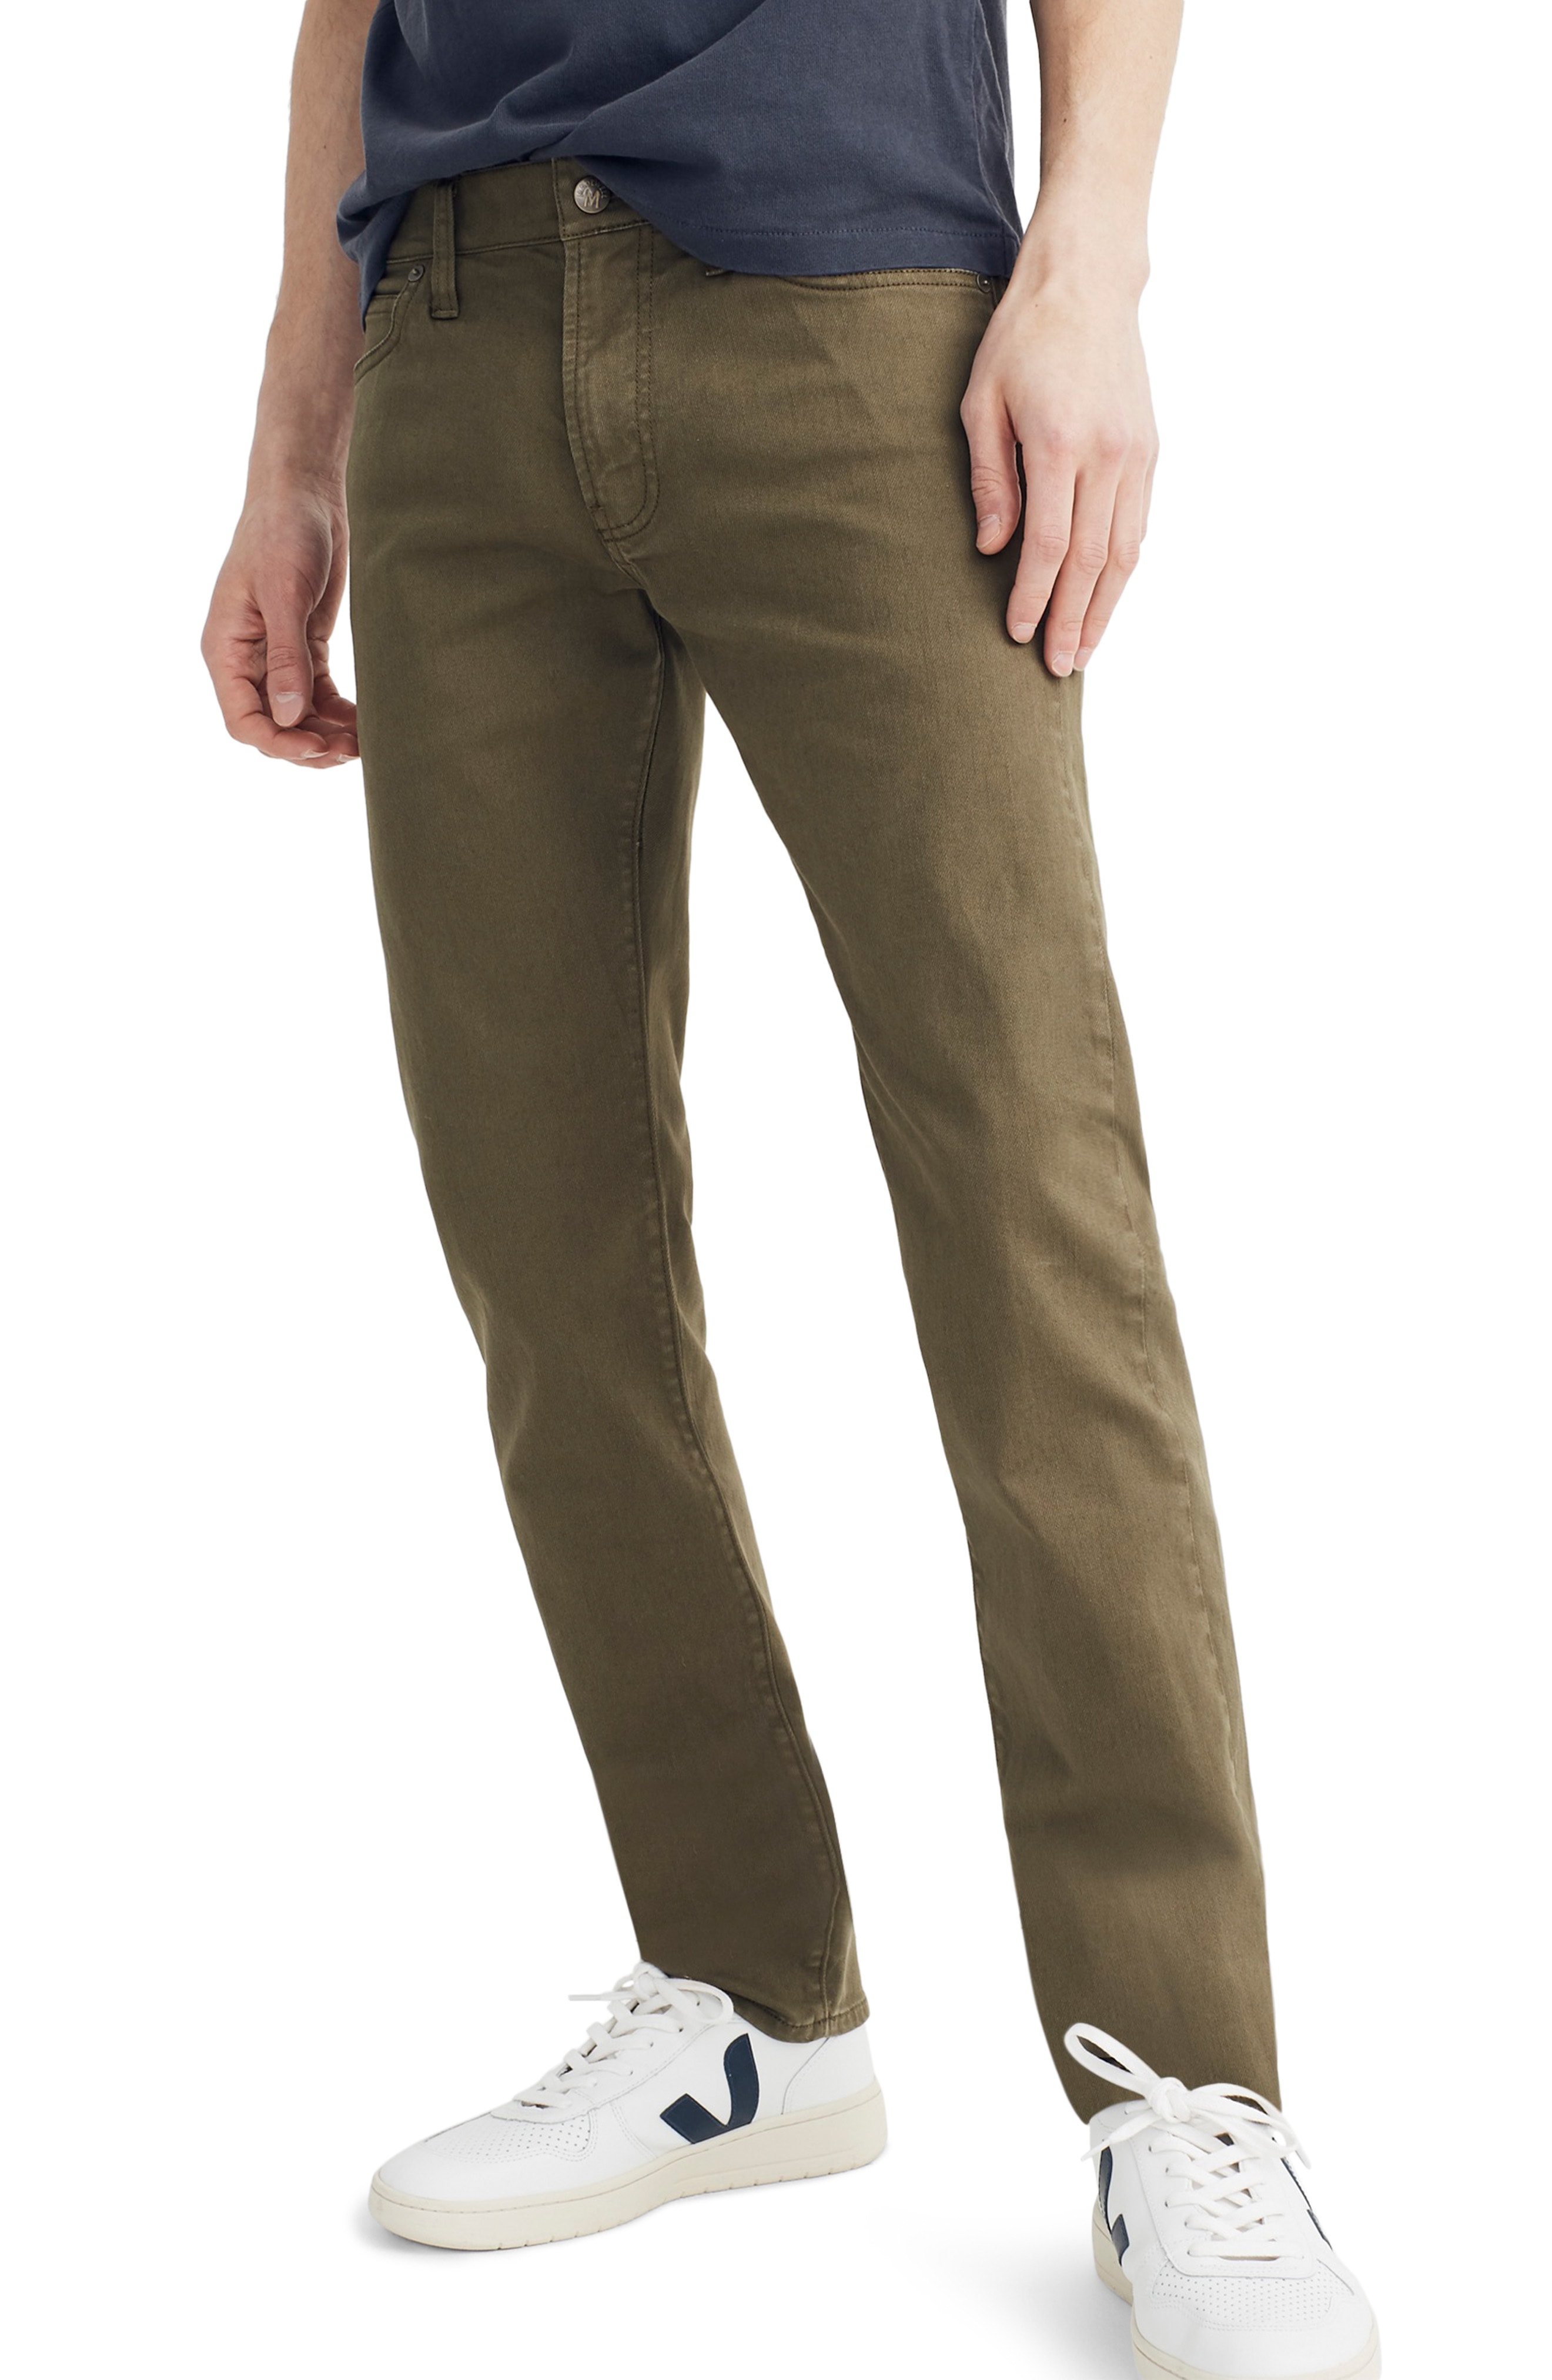 Men’s Madewell Garment Dyed Slim Fit Jeans, Size 36 x 32 – Green | The ...